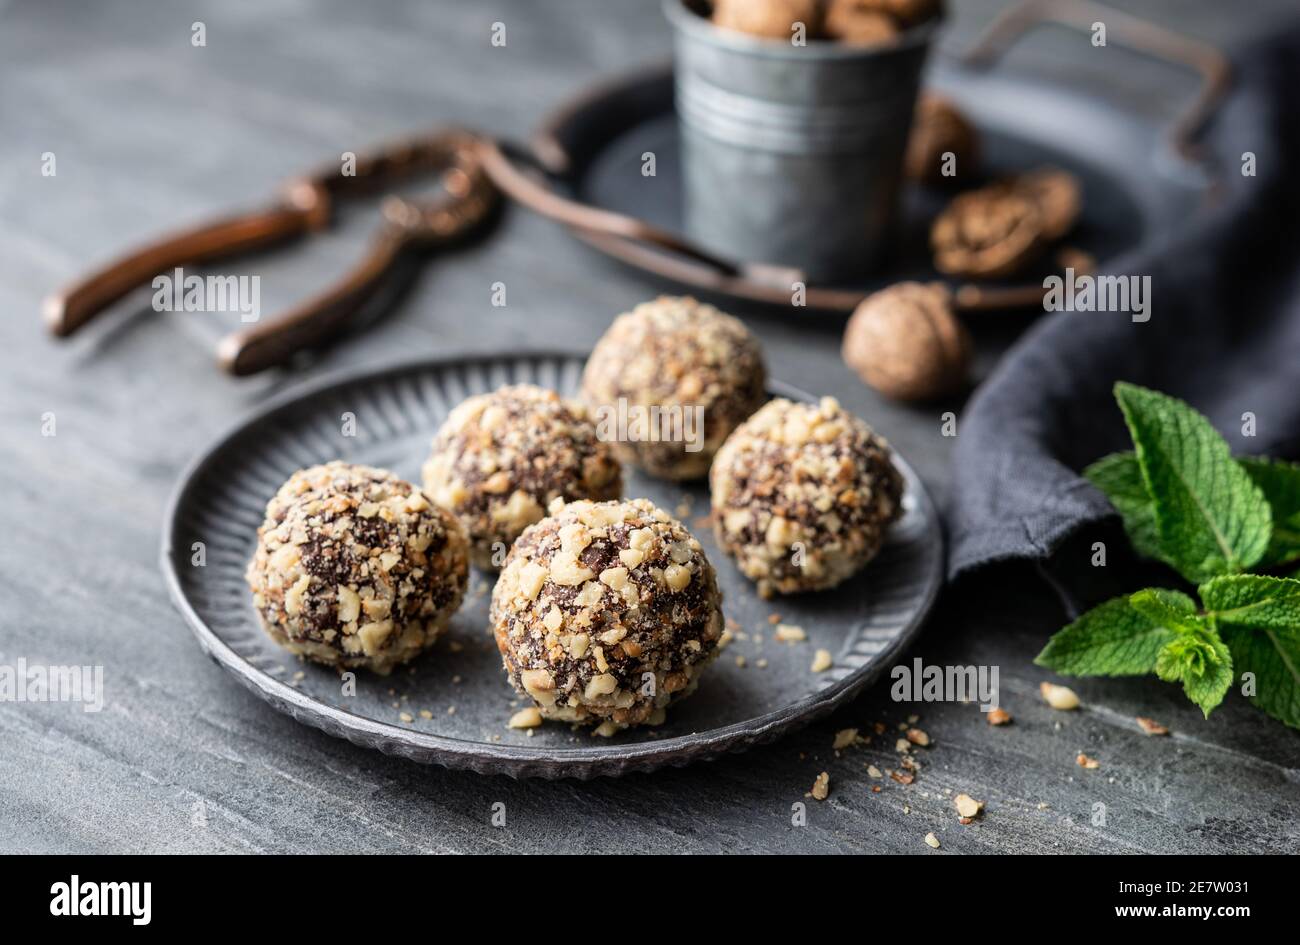 Dark chocolate truffle coated in chopped and toasted walnuts on a plate on stone background Stock Photo